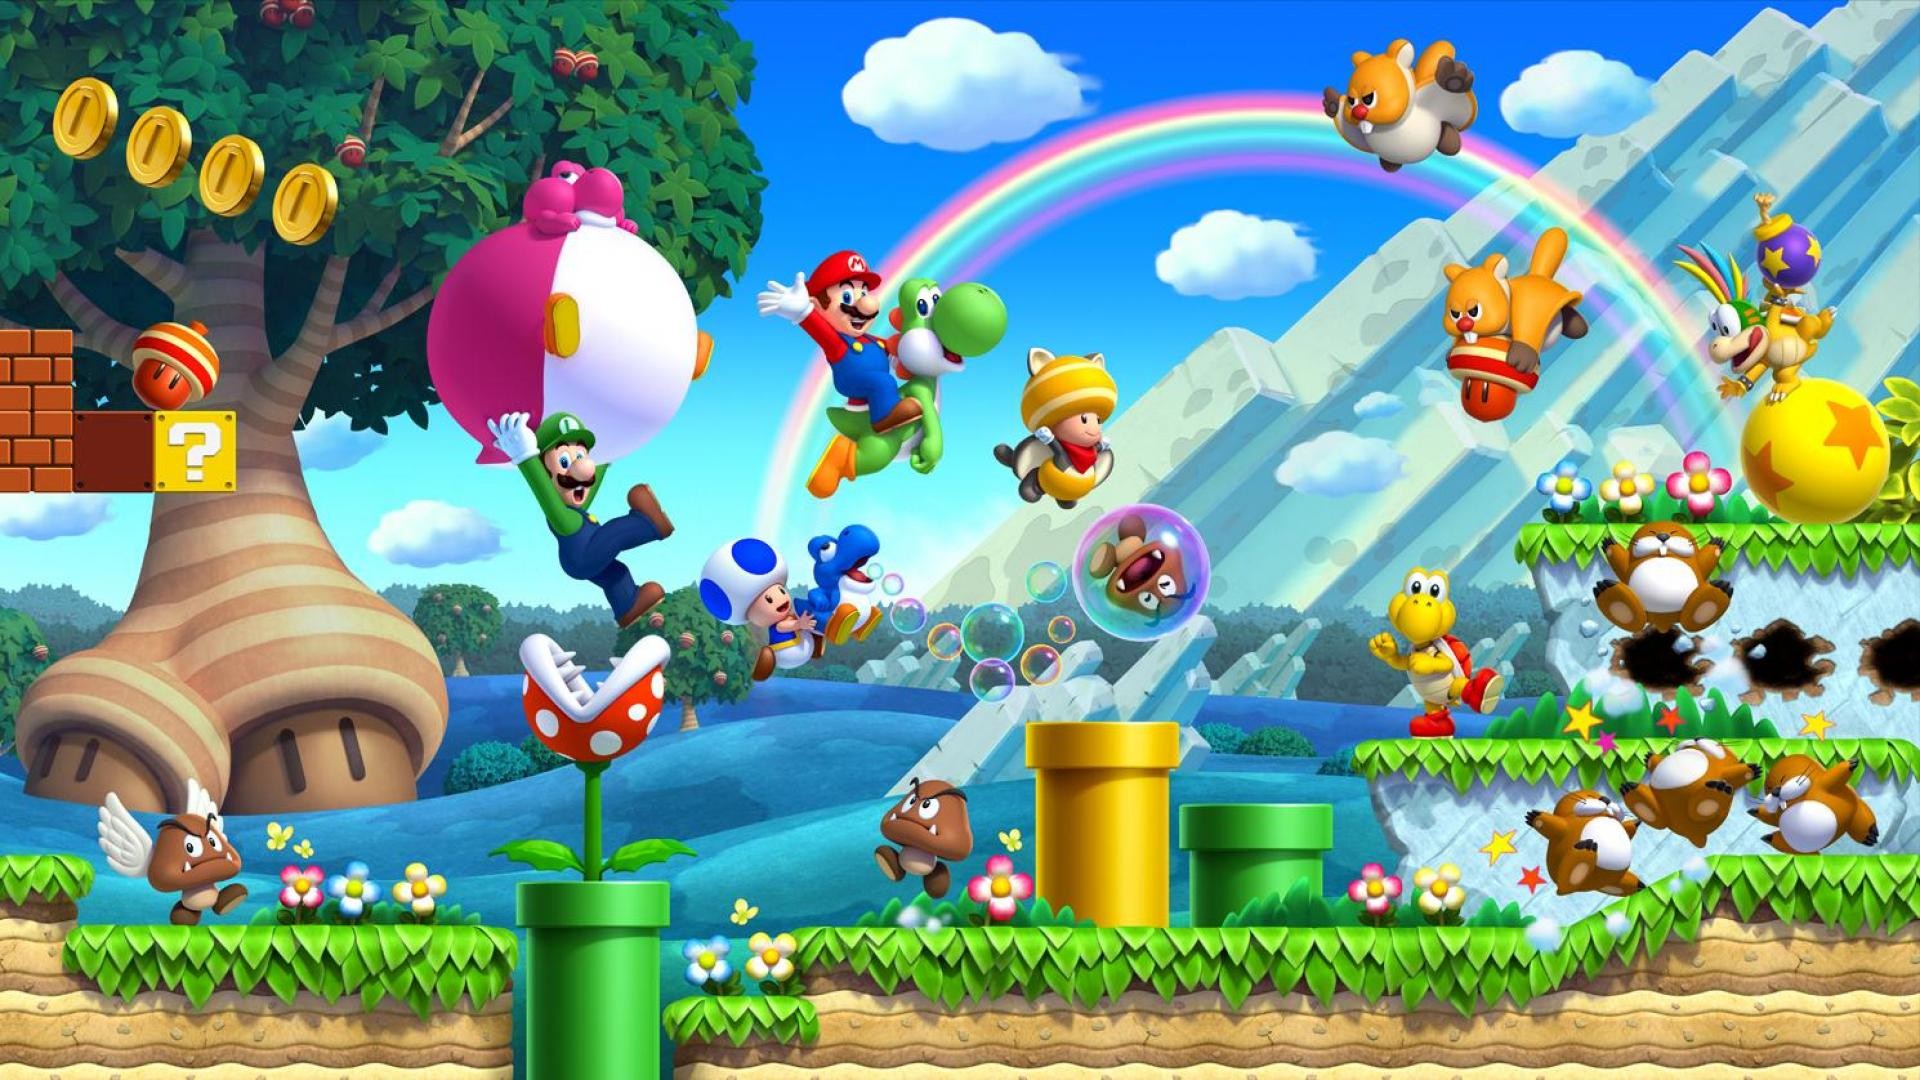 Super Mario wallpaper ·① Download free cool wallpapers for ...